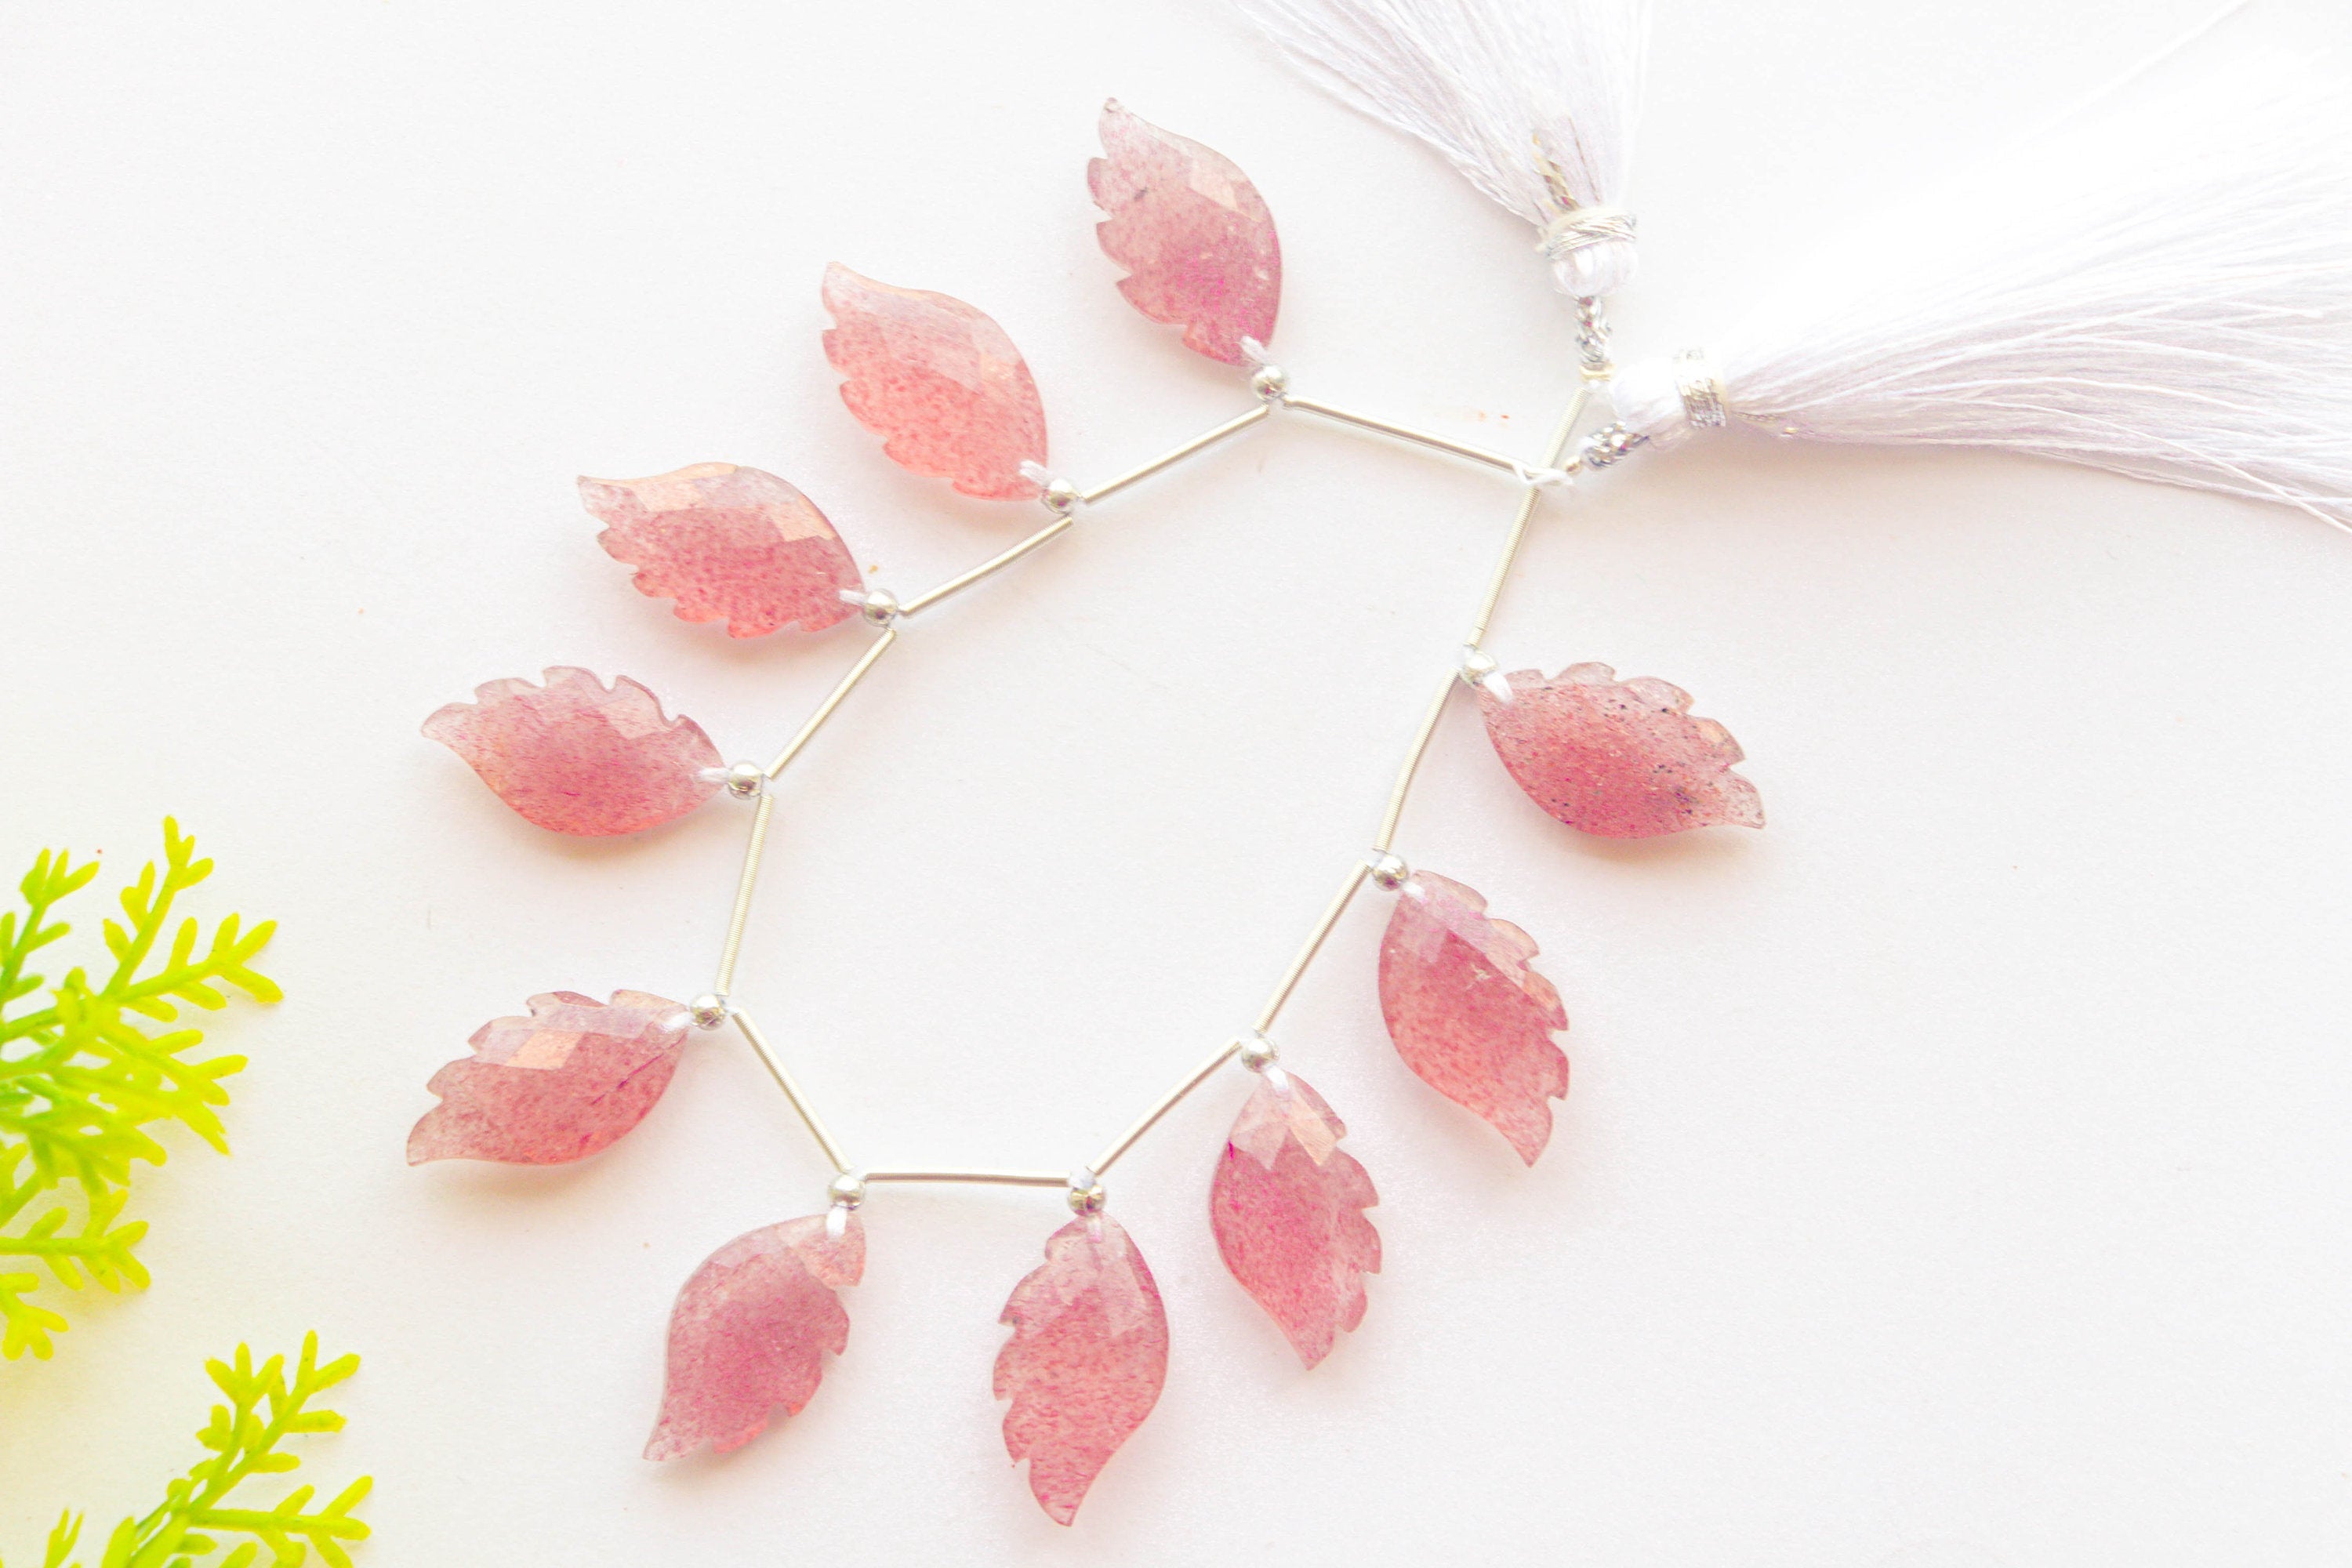 Pink Strawberry Quartz Beads Faceted Wings Shape | 10x20mm | 8 Pieces String | Natural Gemstone | Beadsforyourjewellery Beadsforyourjewelry